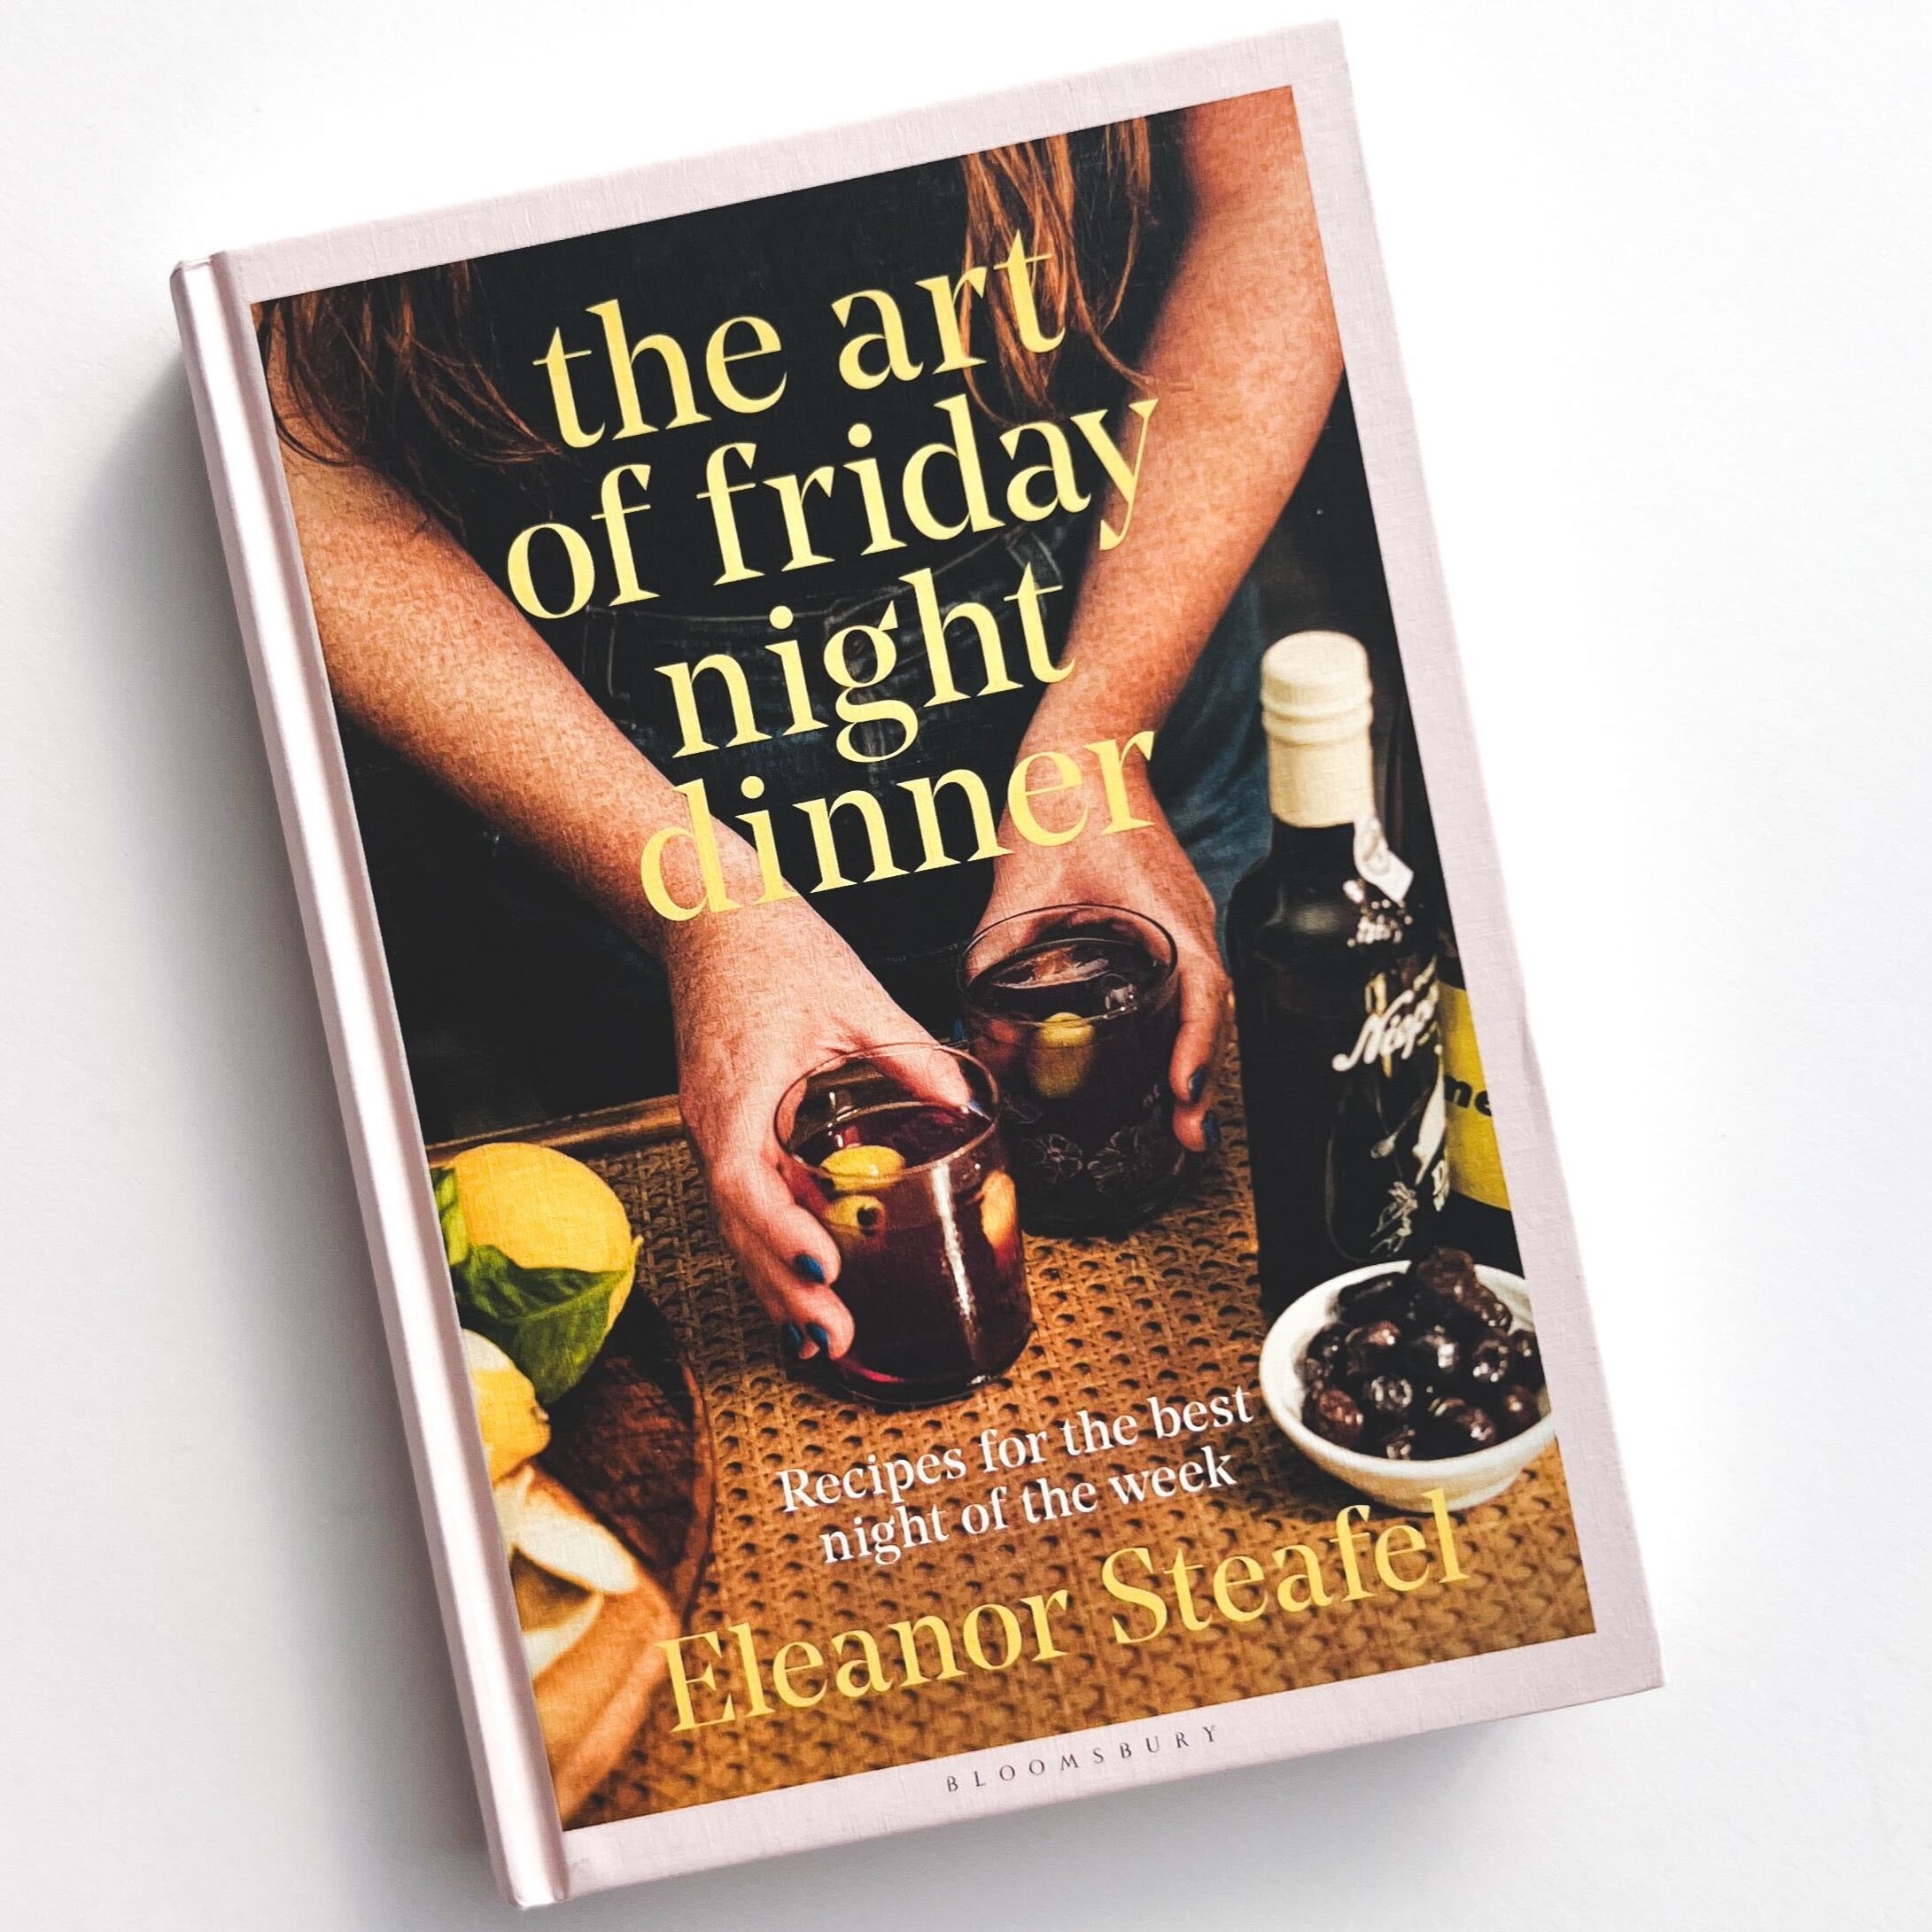 Cover of the art of friday night dinner with hands holding drinks in each